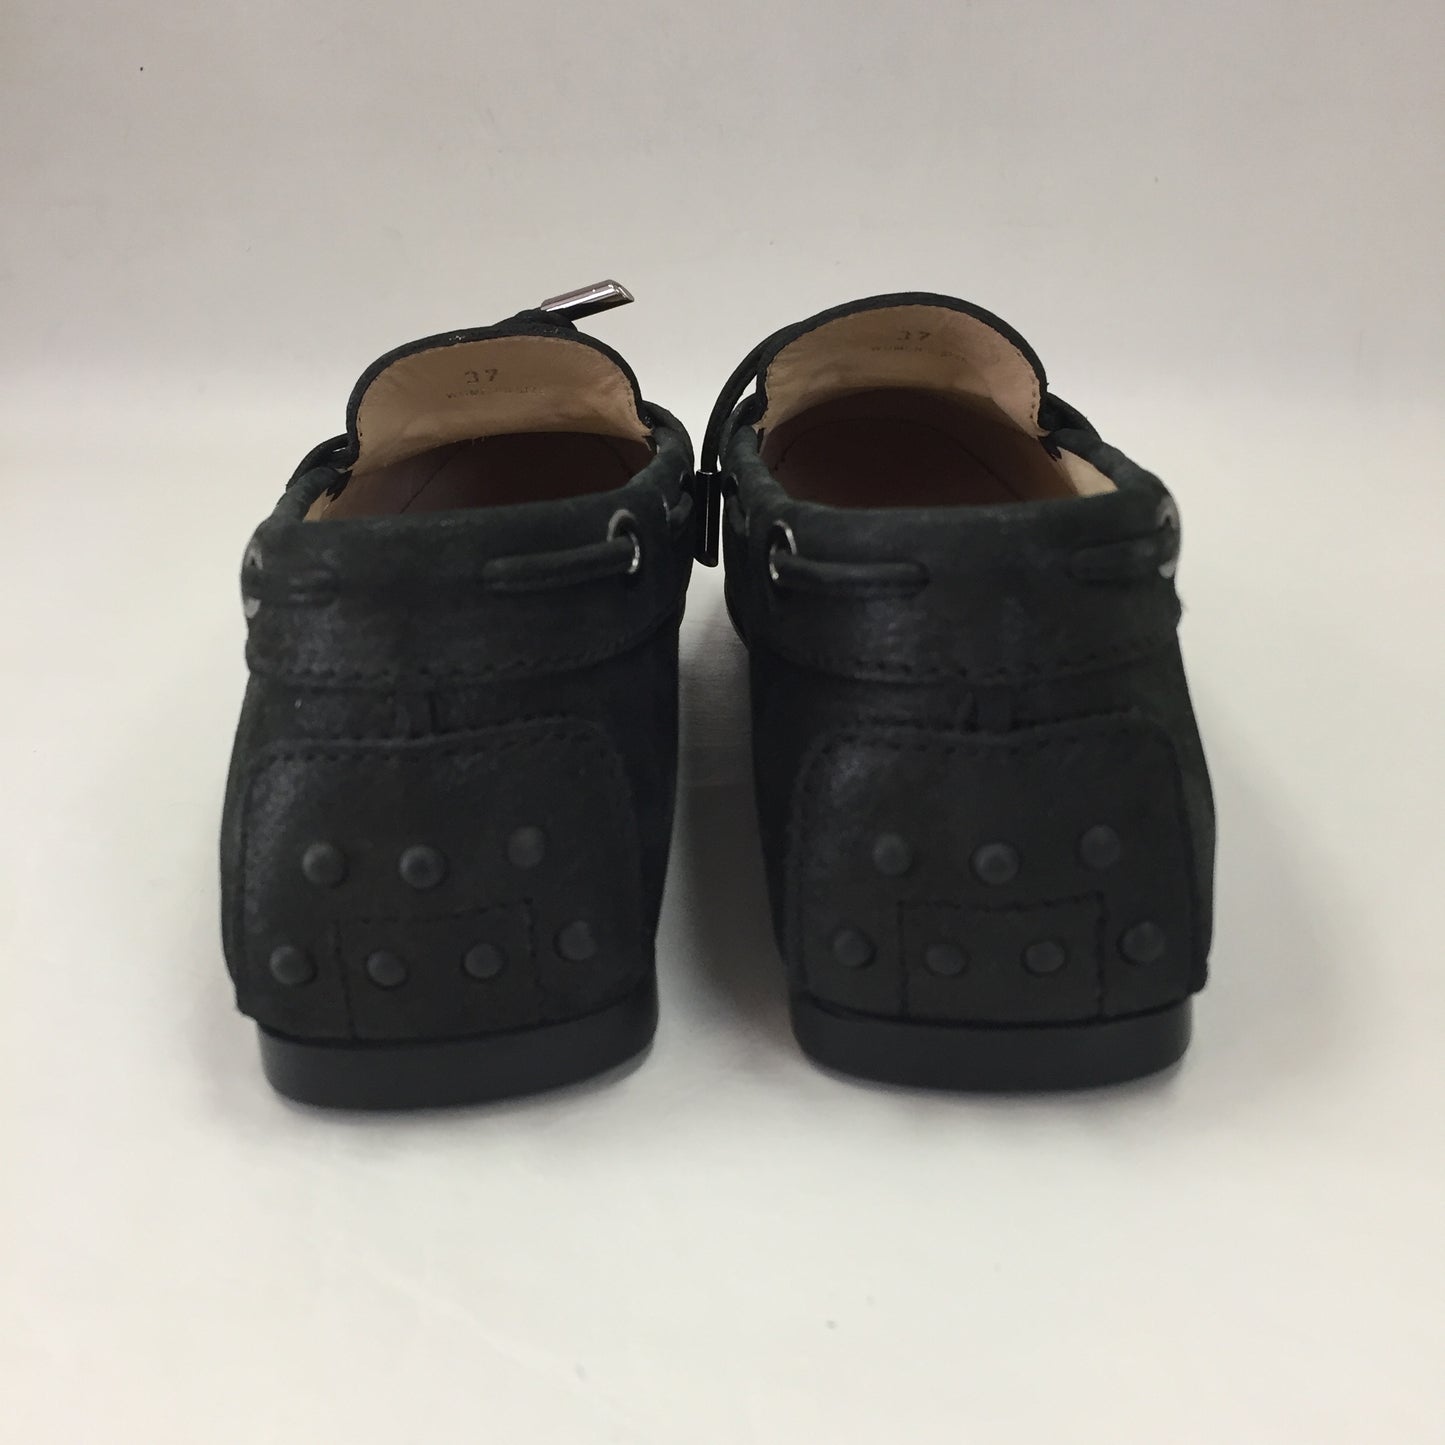 Authentic Tod's Black Electric Suede Driving Moccasins Women's Size 7